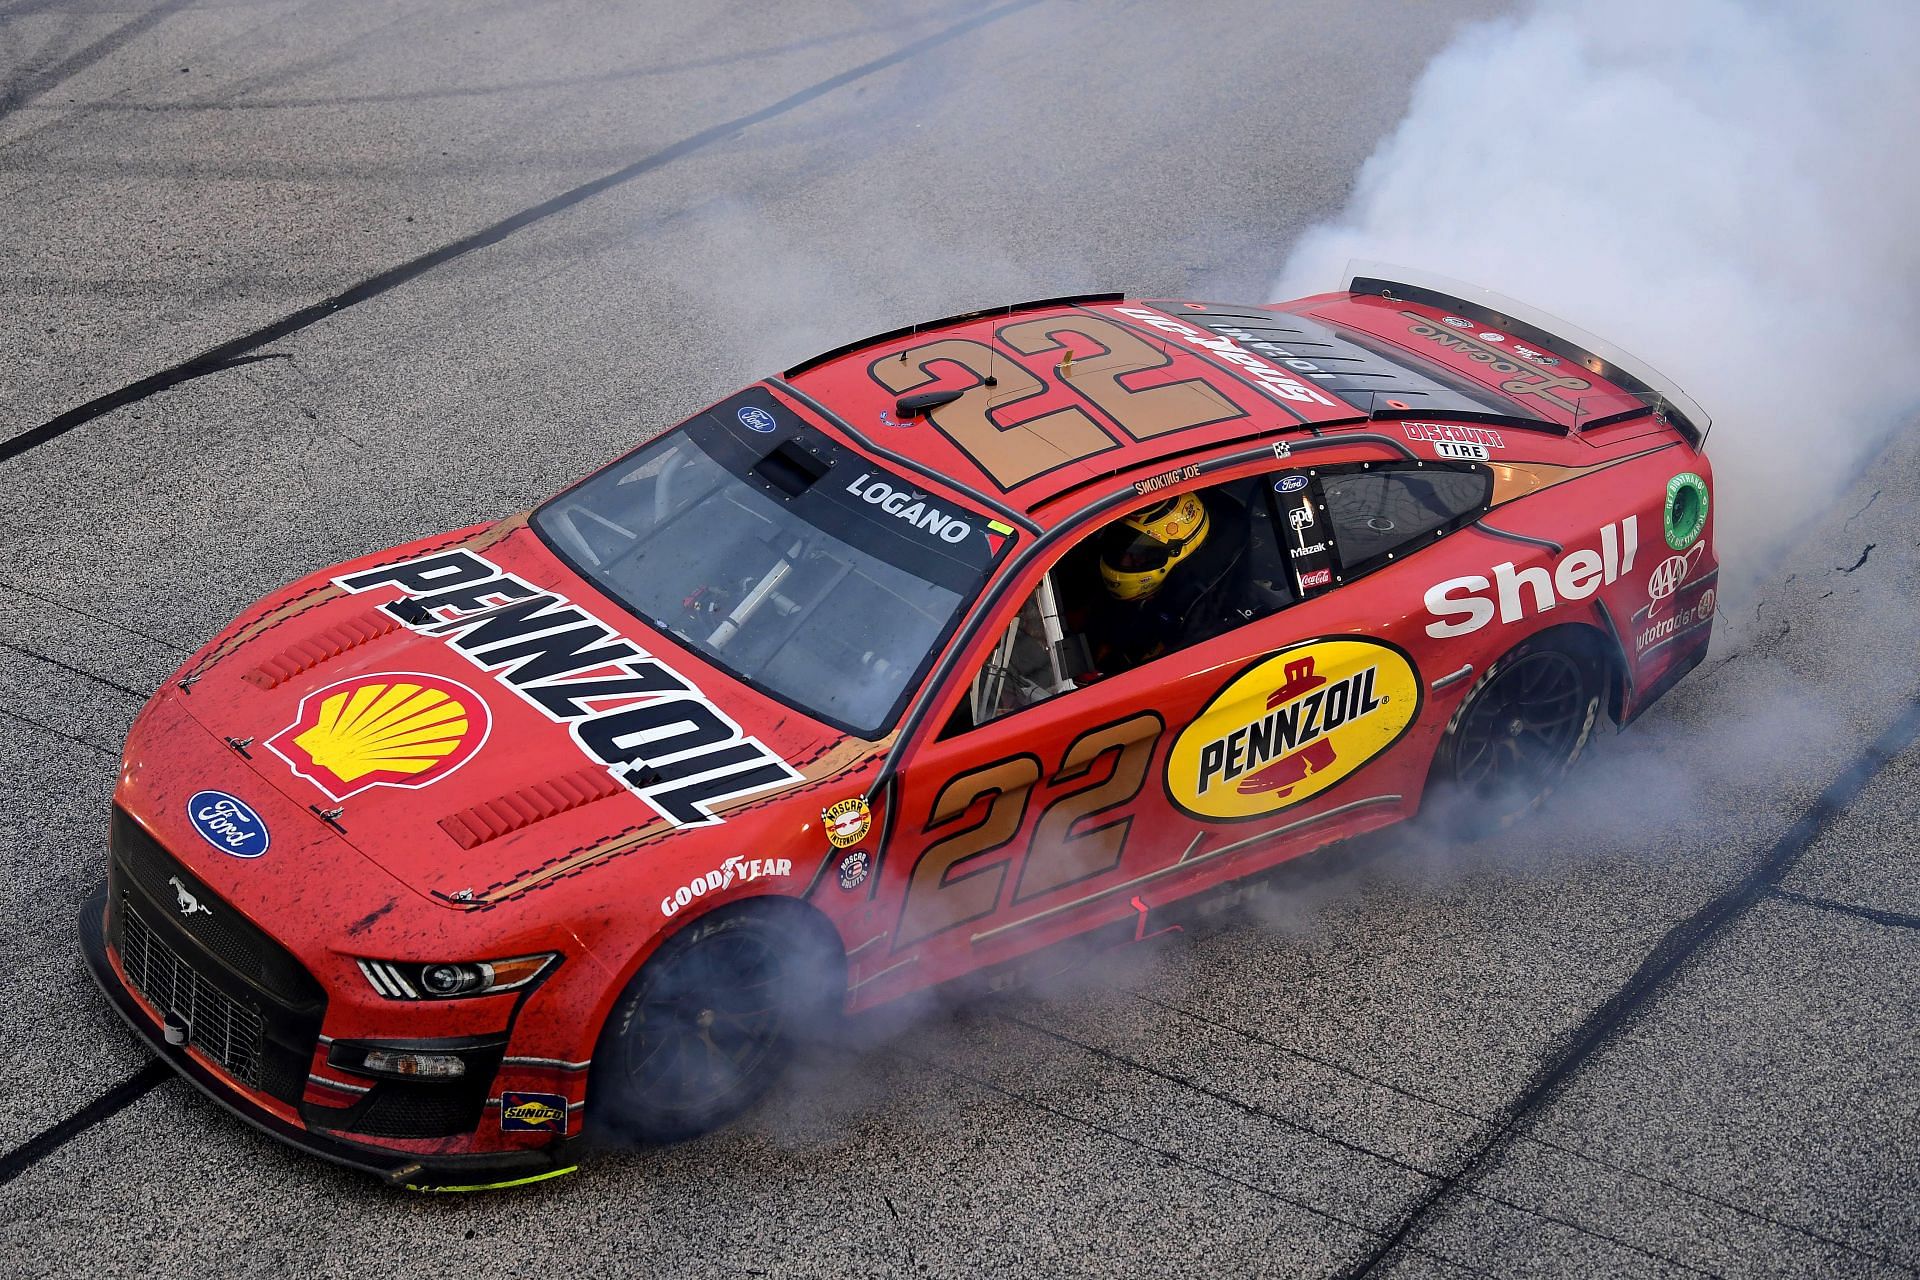 Joey Logano celebrates with a burnout after winning the 2022 NASCAR Cup Series Goodyear 400 at Darlington Raceway in Darlington, South Carolina. (Photo by Emilee Chinn/Getty Images)